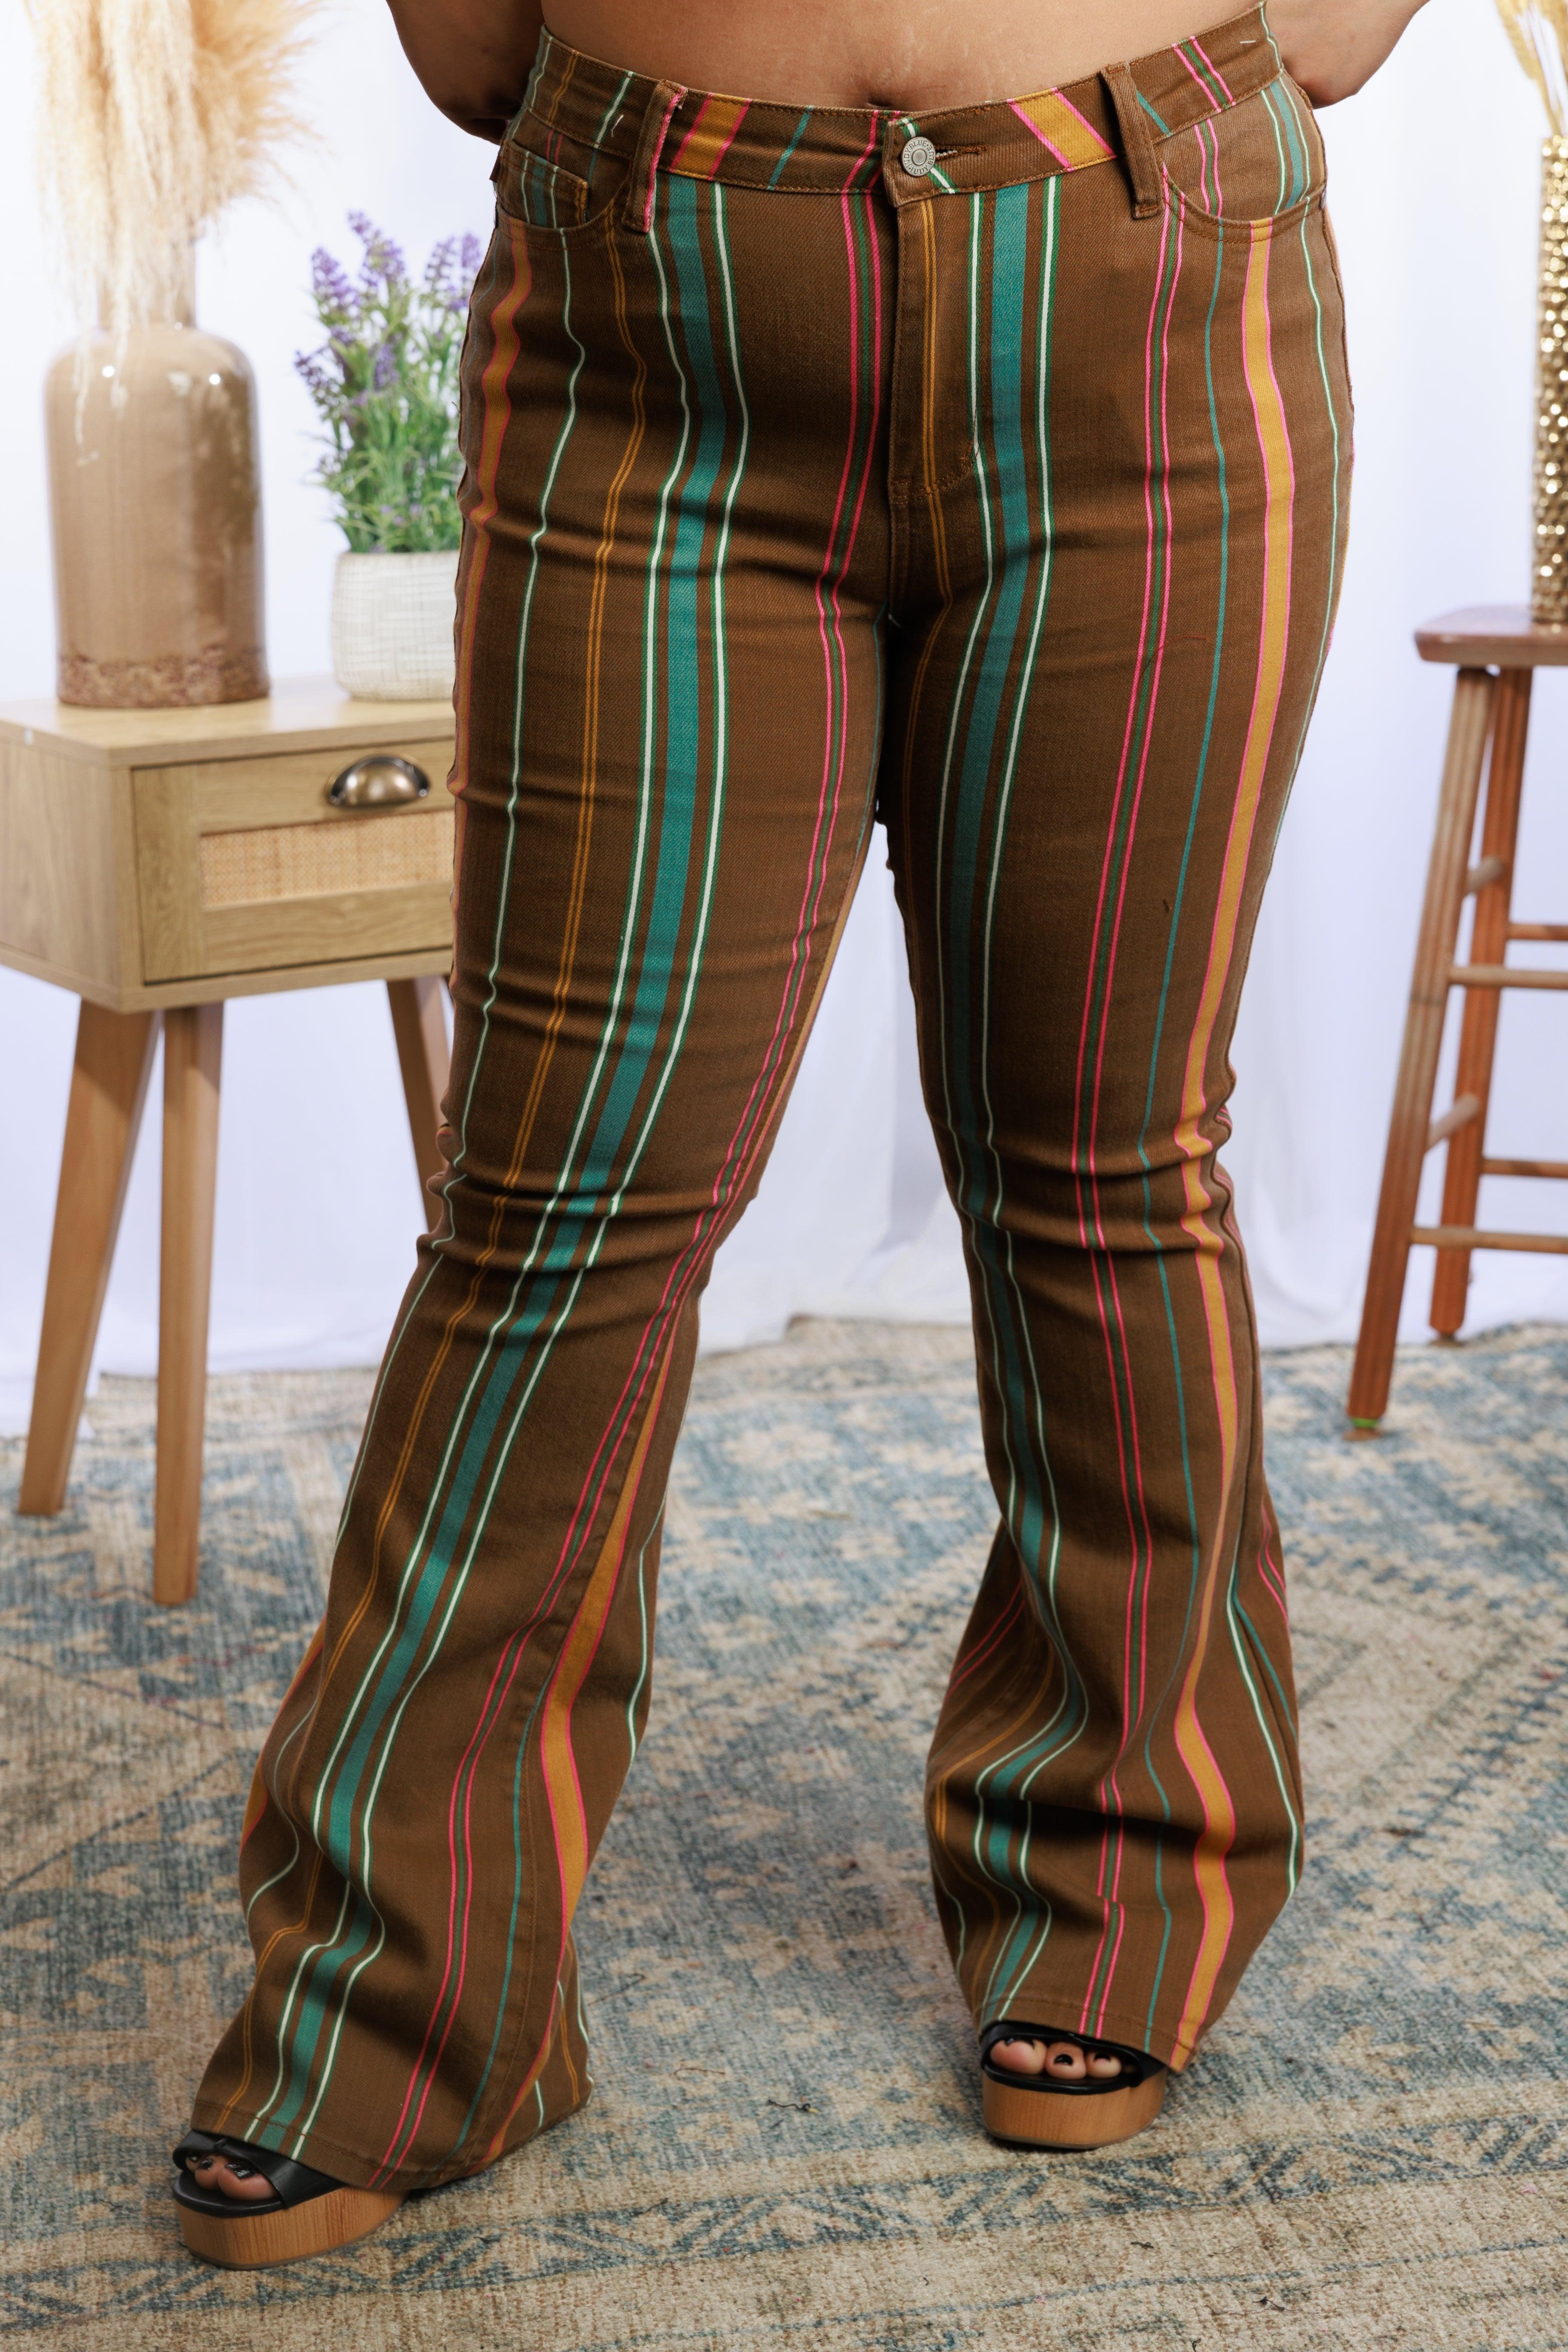 Astrid Judy Blue Striped Flares Giftmas Boutique Simplified   